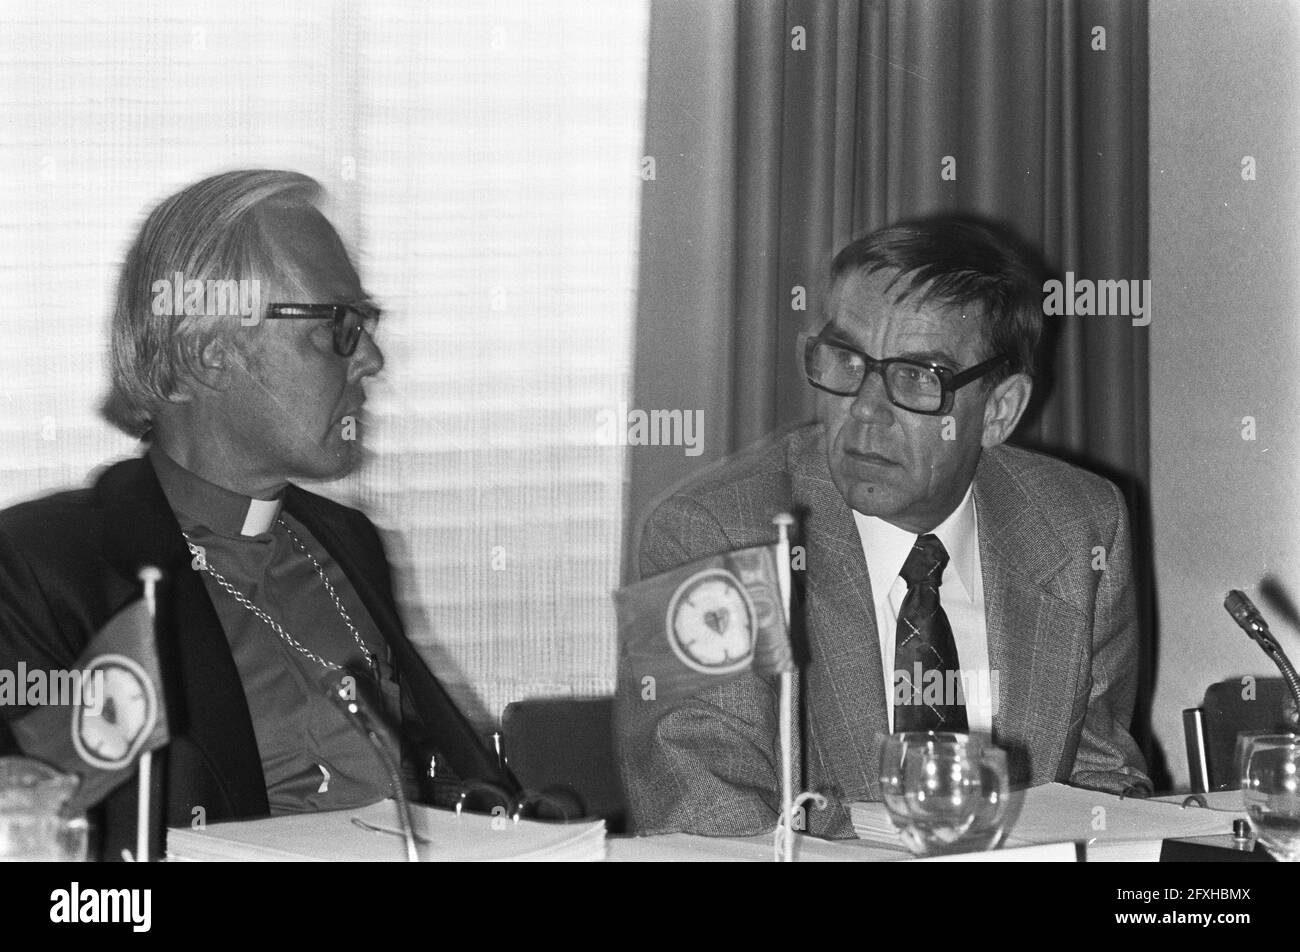 President Mikko Jewa (r) and Secretary General Carl H. Mau, August 18, 1975, conferences, churches, portraits, presidents, The Netherlands, 20th century press agency photo, news to remember, documentary, historic photography 1945-1990, visual stories, human history of the Twentieth Century, capturing moments in time Stock Photo